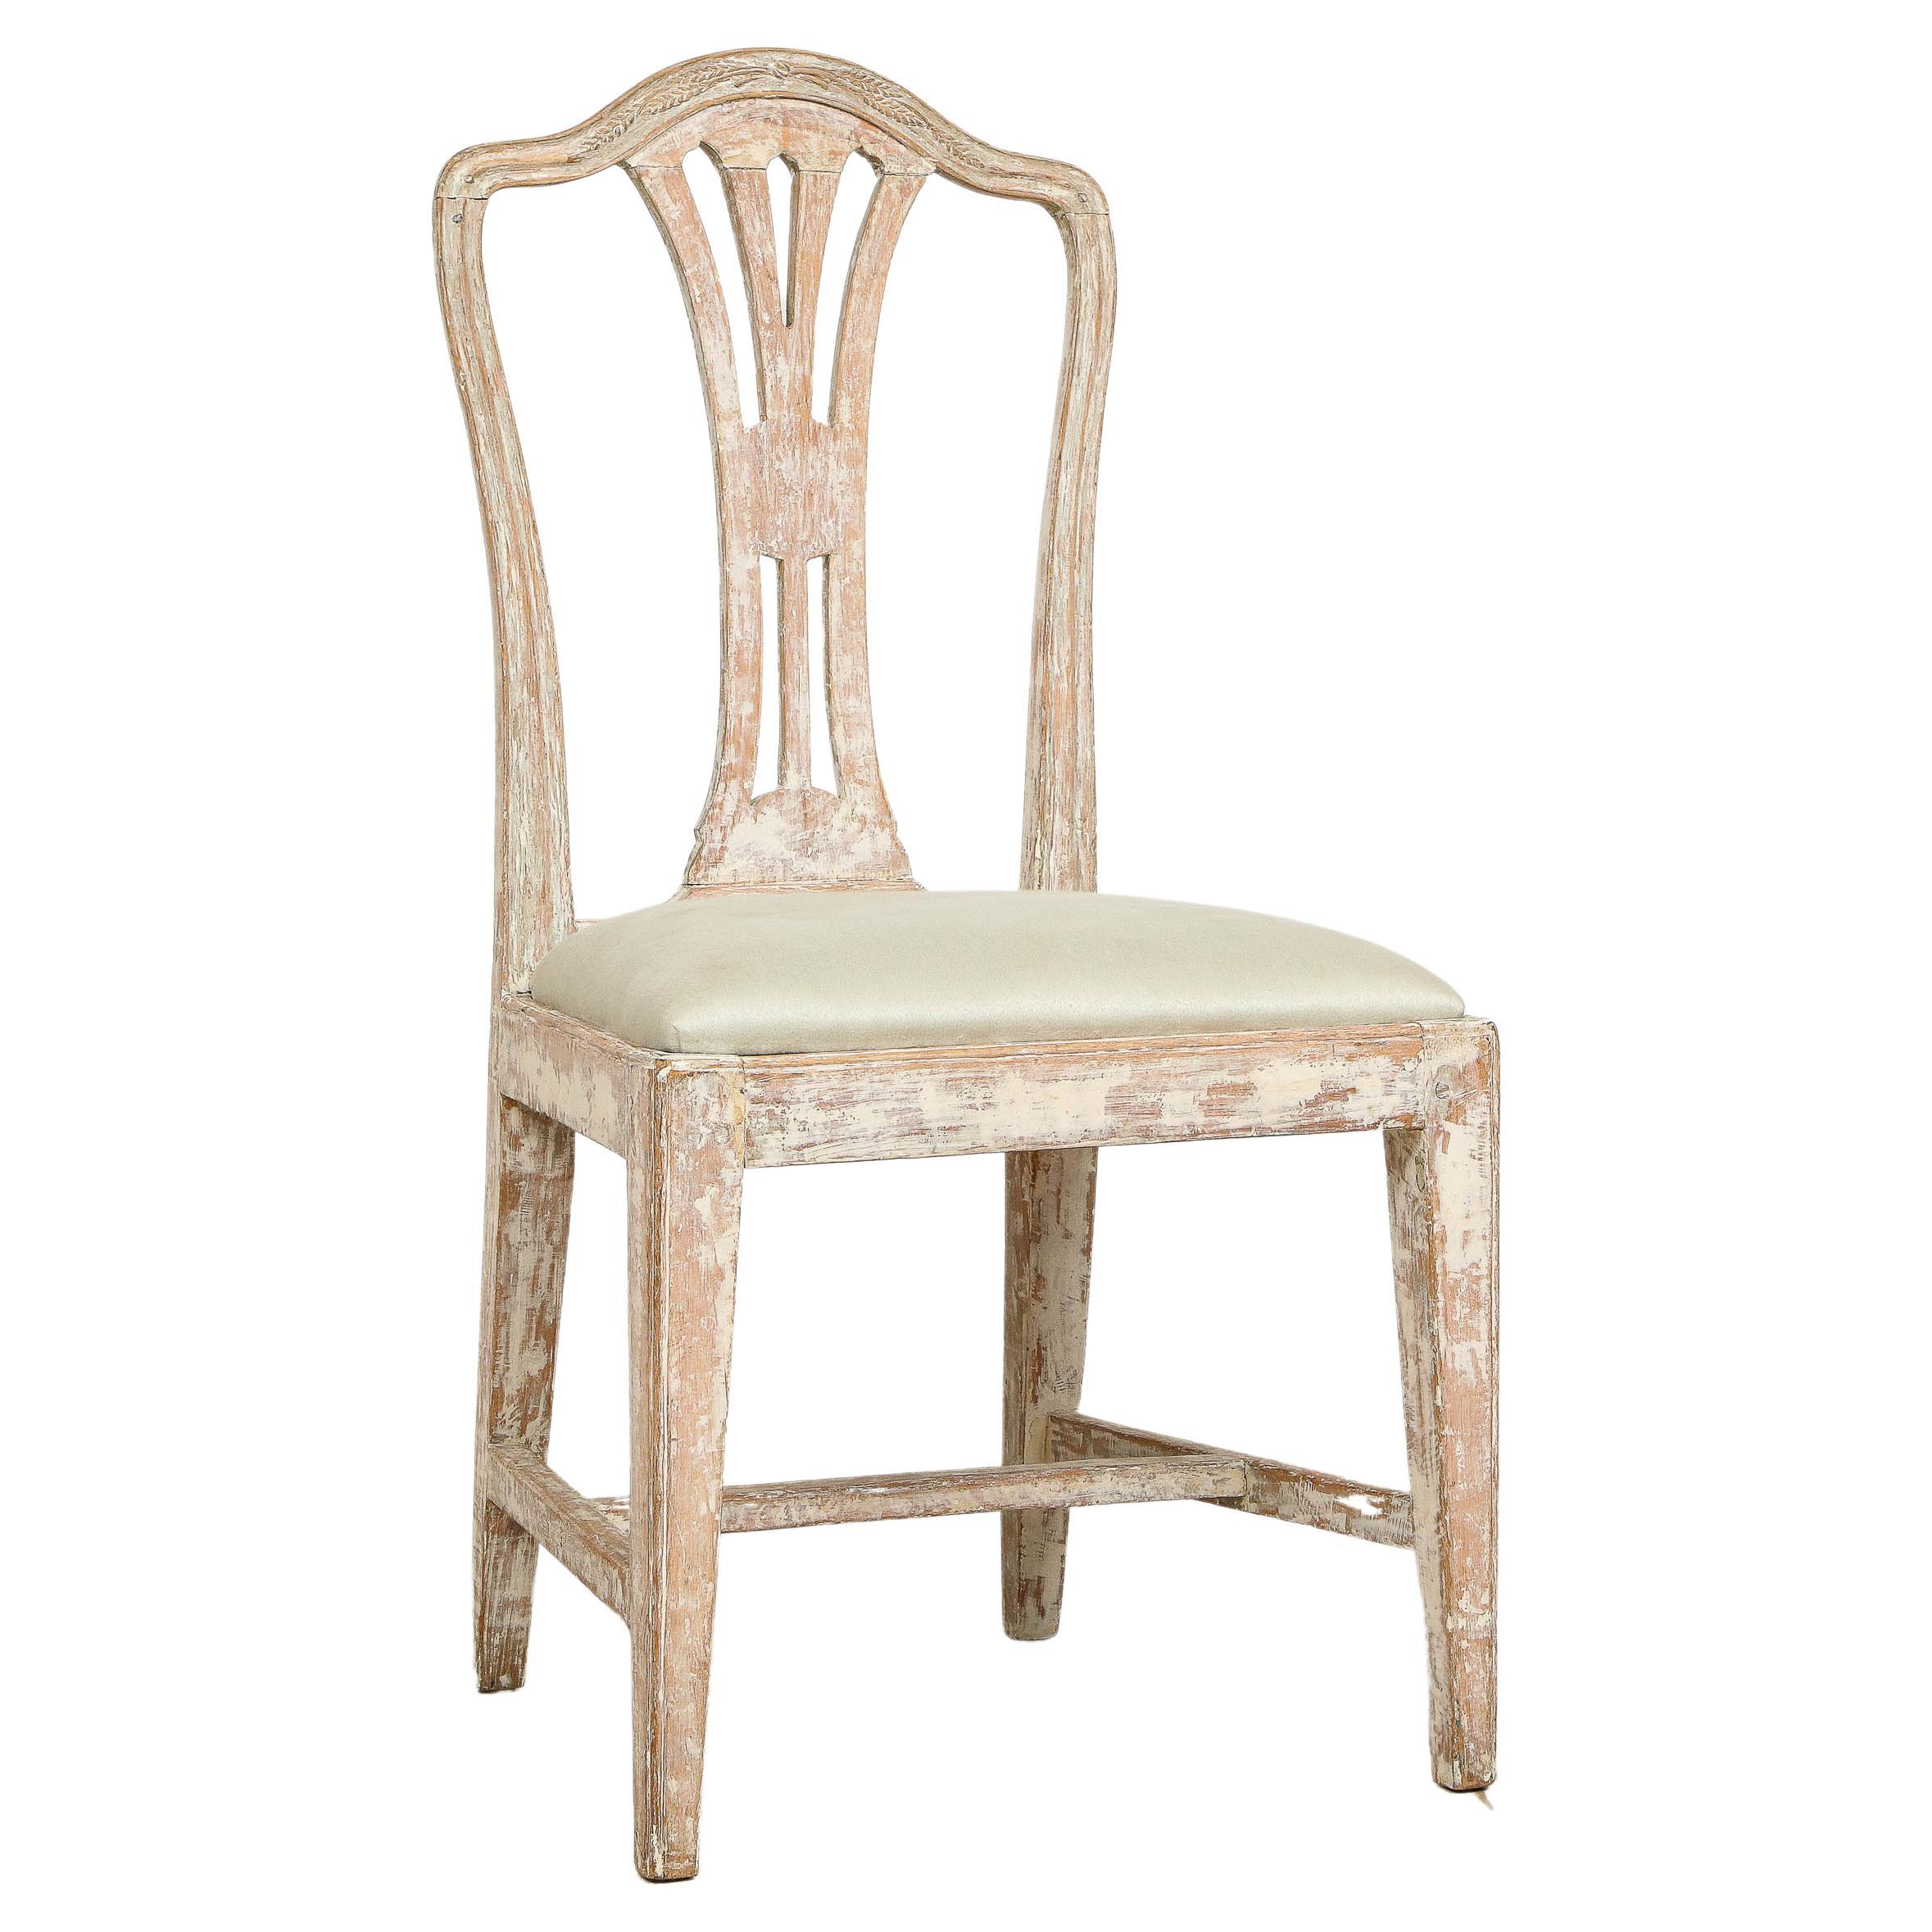 Swedish Gustavian Chair with Wheat Carving, Circa 1780, Origin: Sweden For Sale